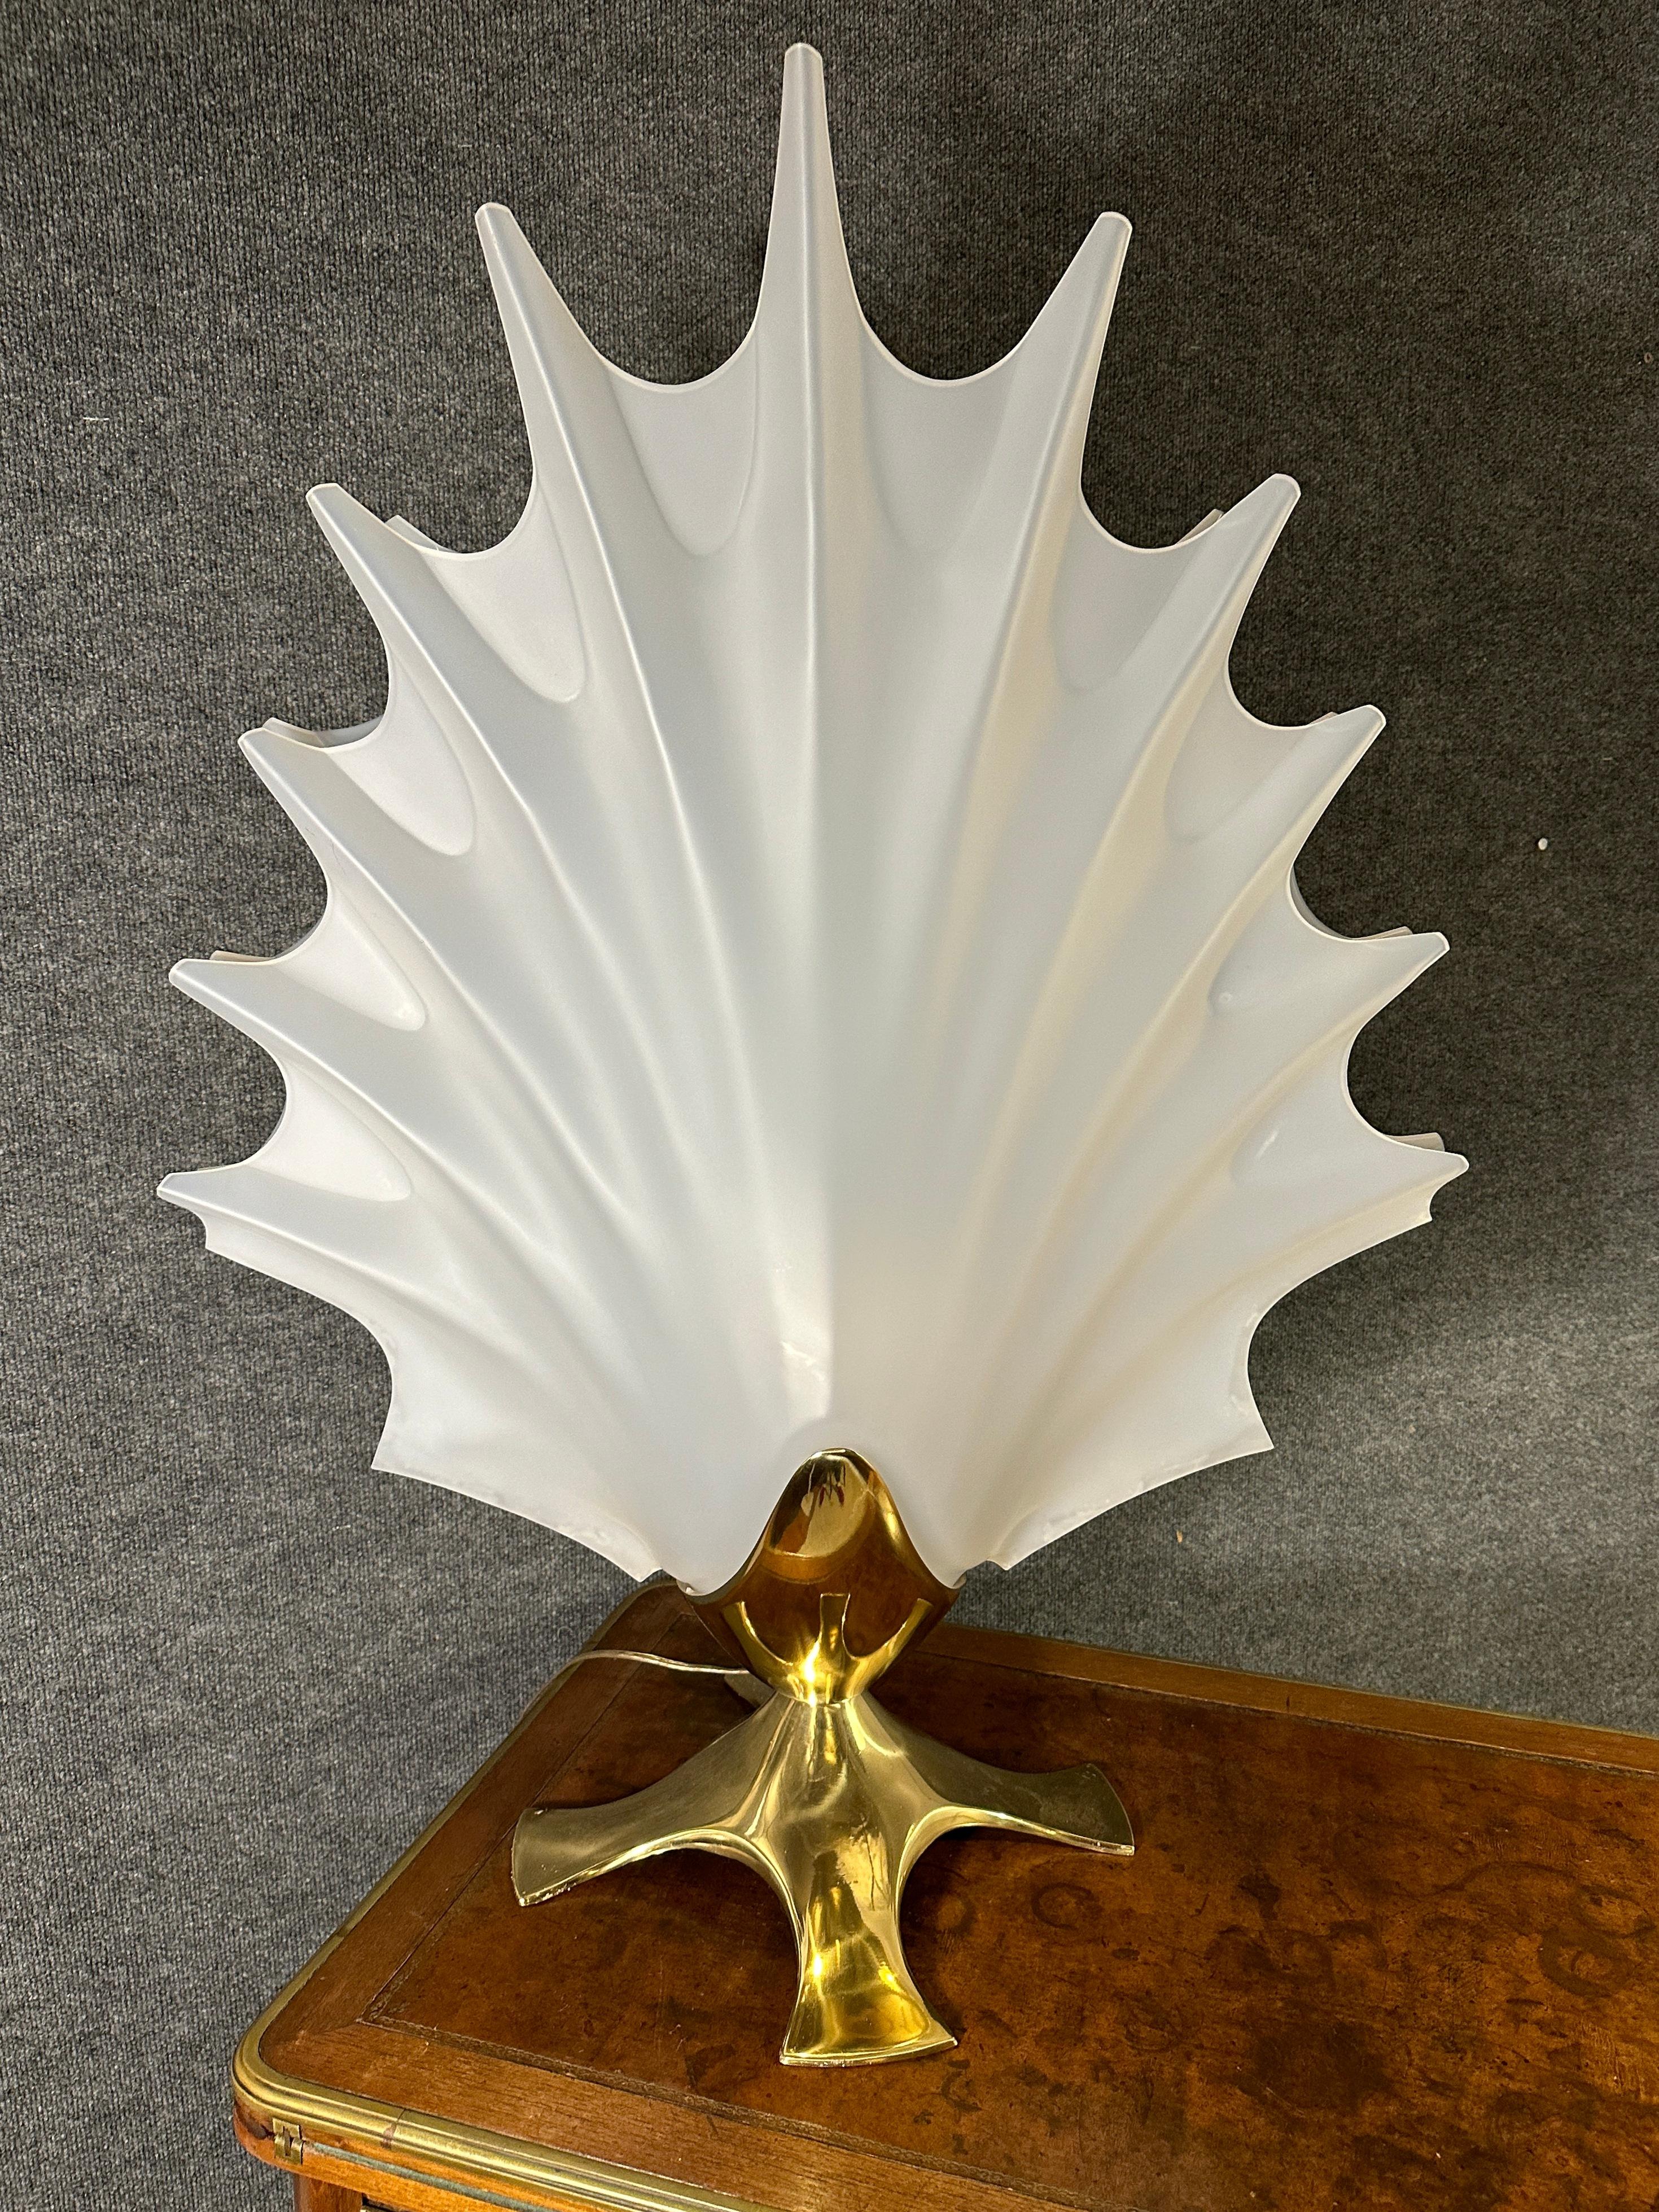 This Large and Rare Lucite Sea Shell Roger Rougier Lamp is an iconic piece. Its striking design is fashioned from acrylic and looks like frosted Opalin.
Resting upon a solid brass foot, the top acrylic shell mirrors the translucence of Opaline with